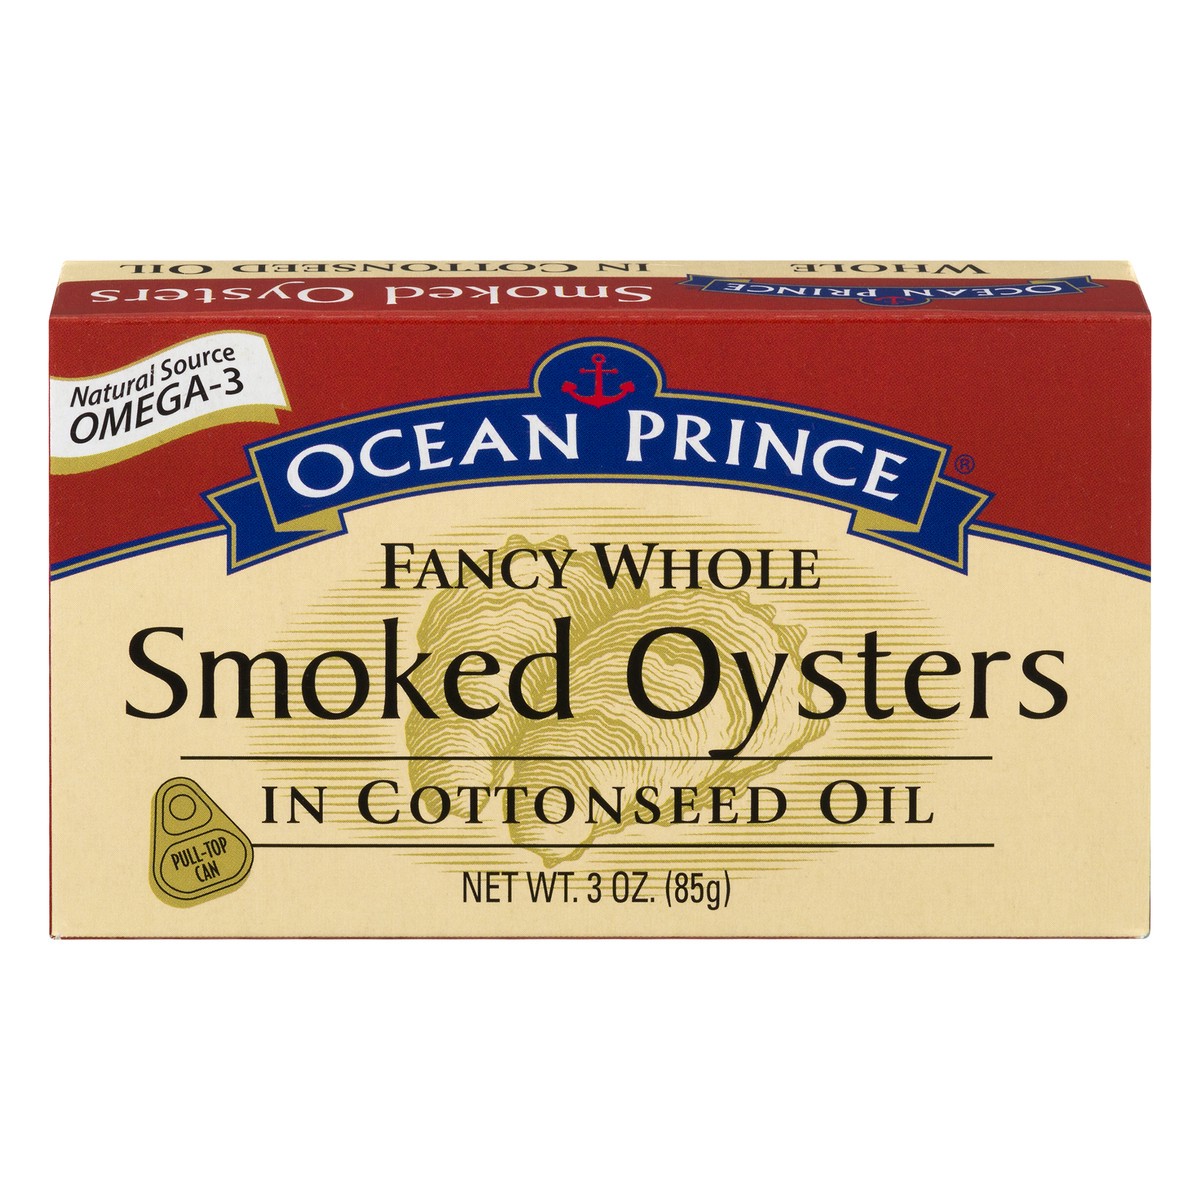 slide 1 of 11, Ocean Prince Fancy Whole in Cottonseed Oil Smoked Oysters 3 oz, 3 oz